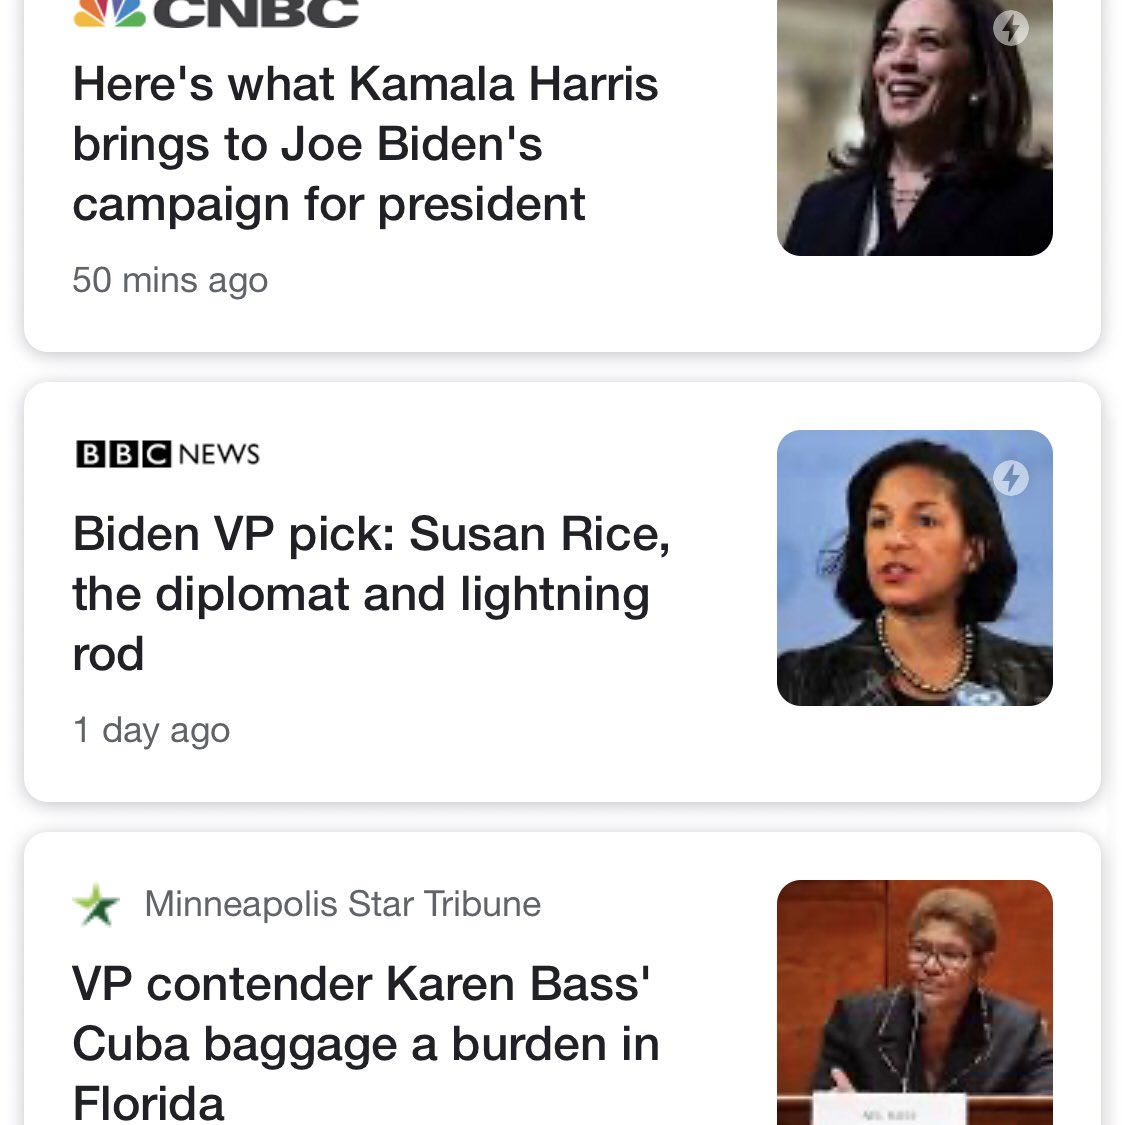 Here's what happens if you search Google News for "baggage" + "campaign." A roster of women!No recent stories about Trump's "baggage" in the campaign—163,000 dead Americans, economic collapse, children in cages, Ukraine, Russia, impeachment—but oh, look at the faces. 8/